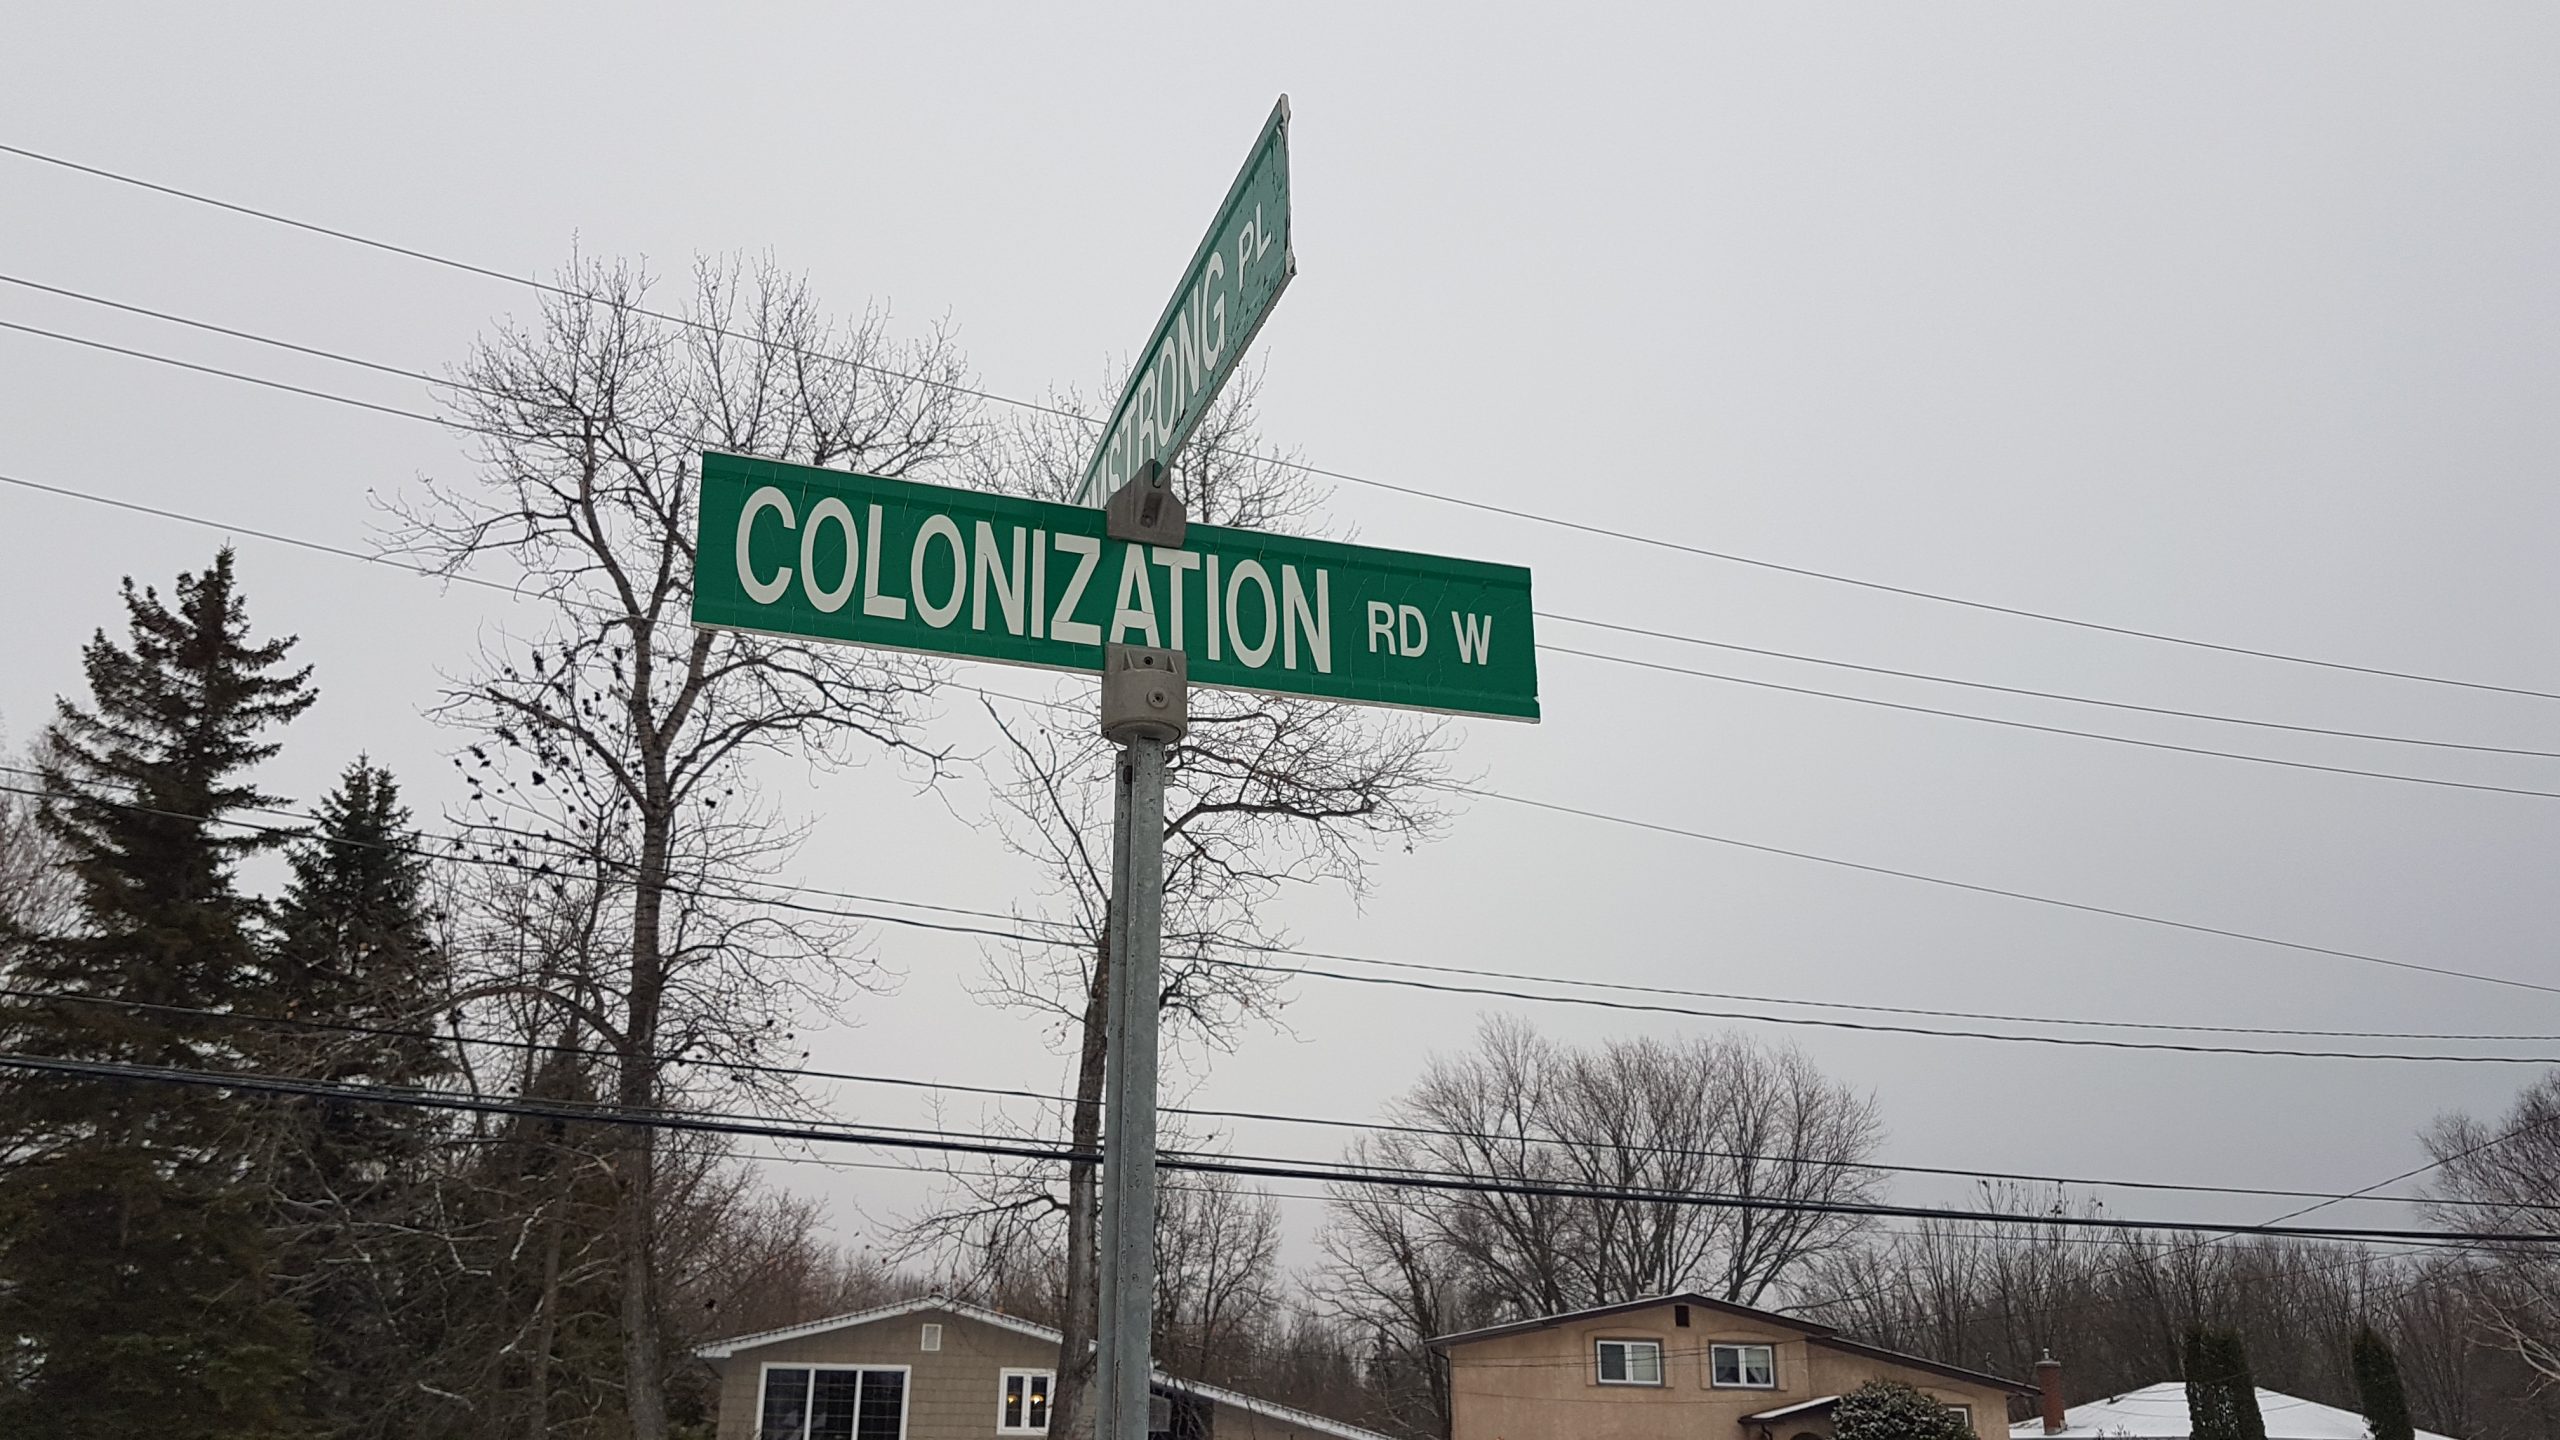 Countdown to official Colonization Roads name change